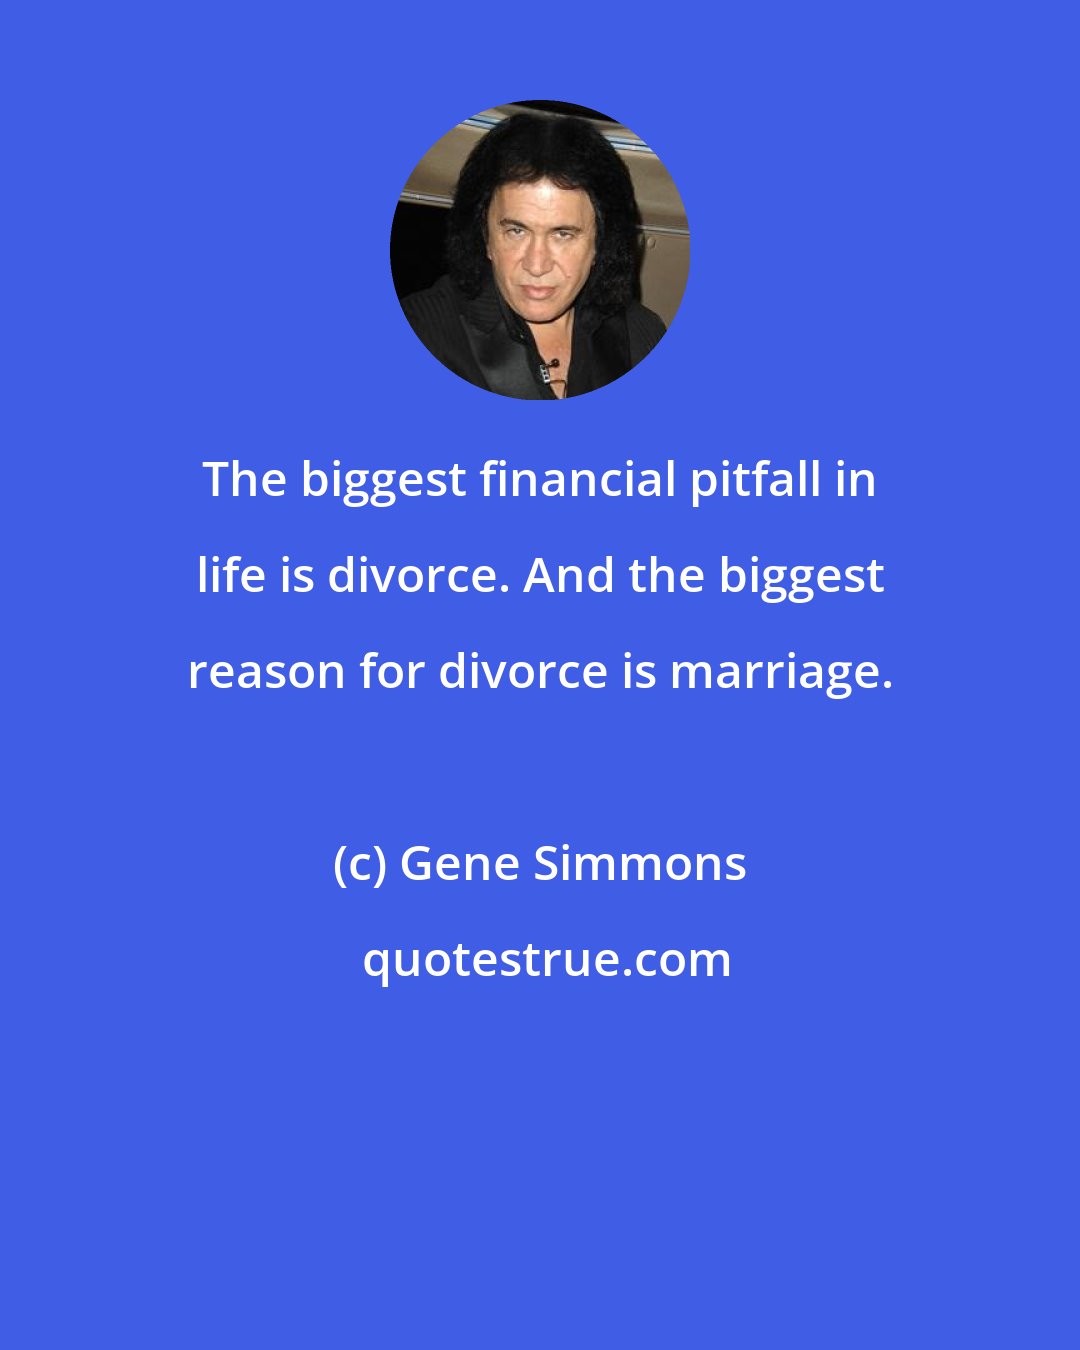 Gene Simmons: The biggest financial pitfall in life is divorce. And the biggest reason for divorce is marriage.